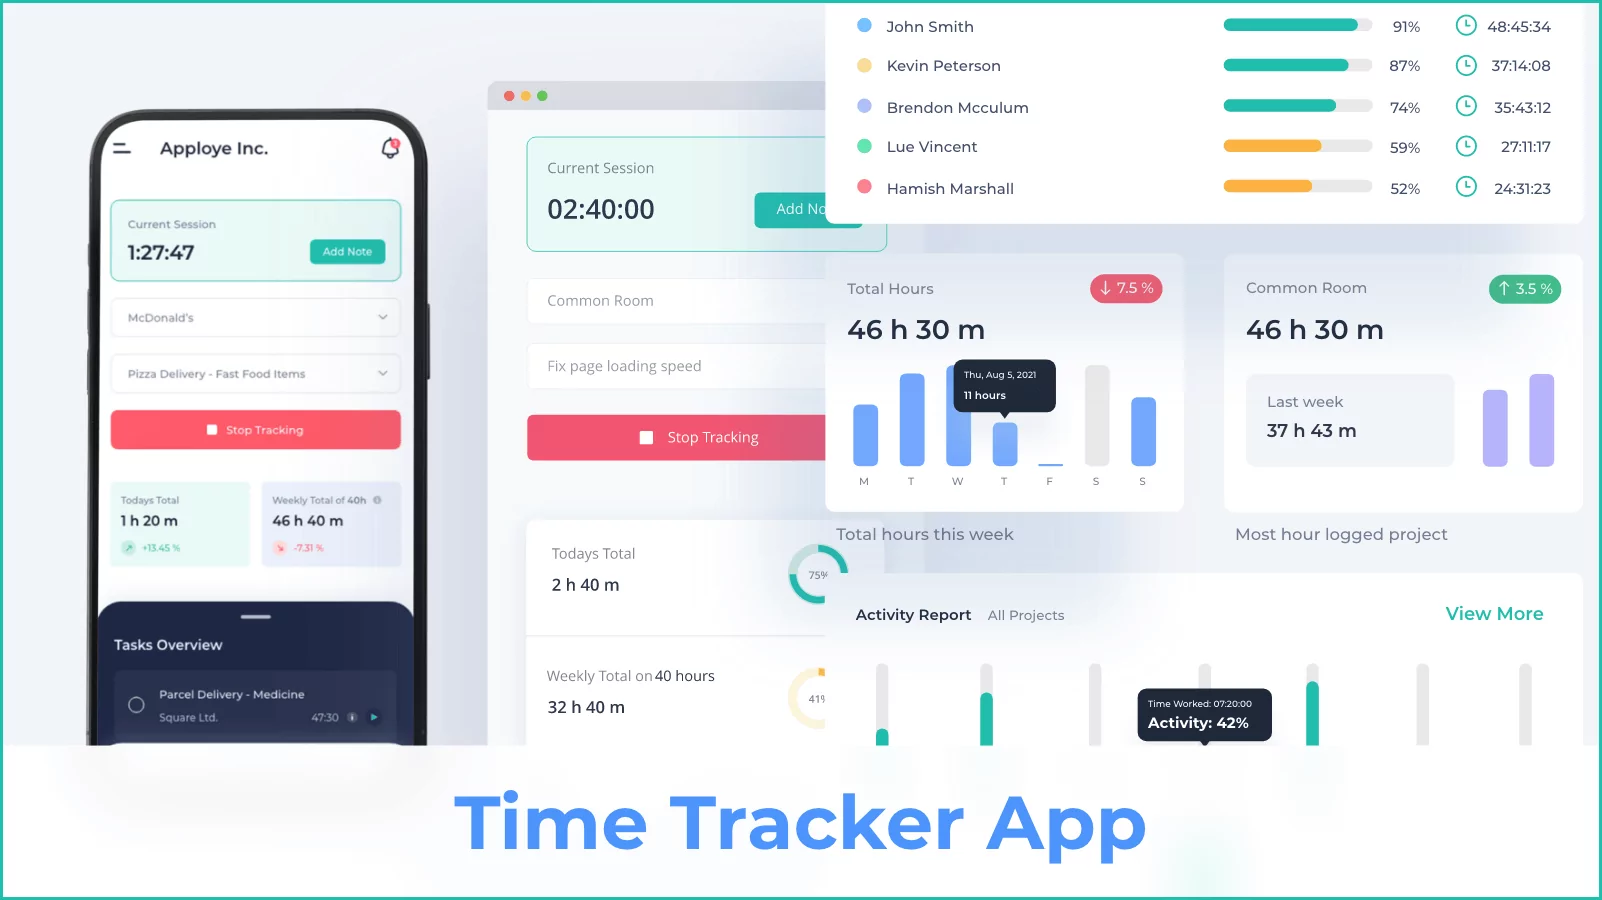 A view of Apploye's web time tracker and mobile time tracking app.